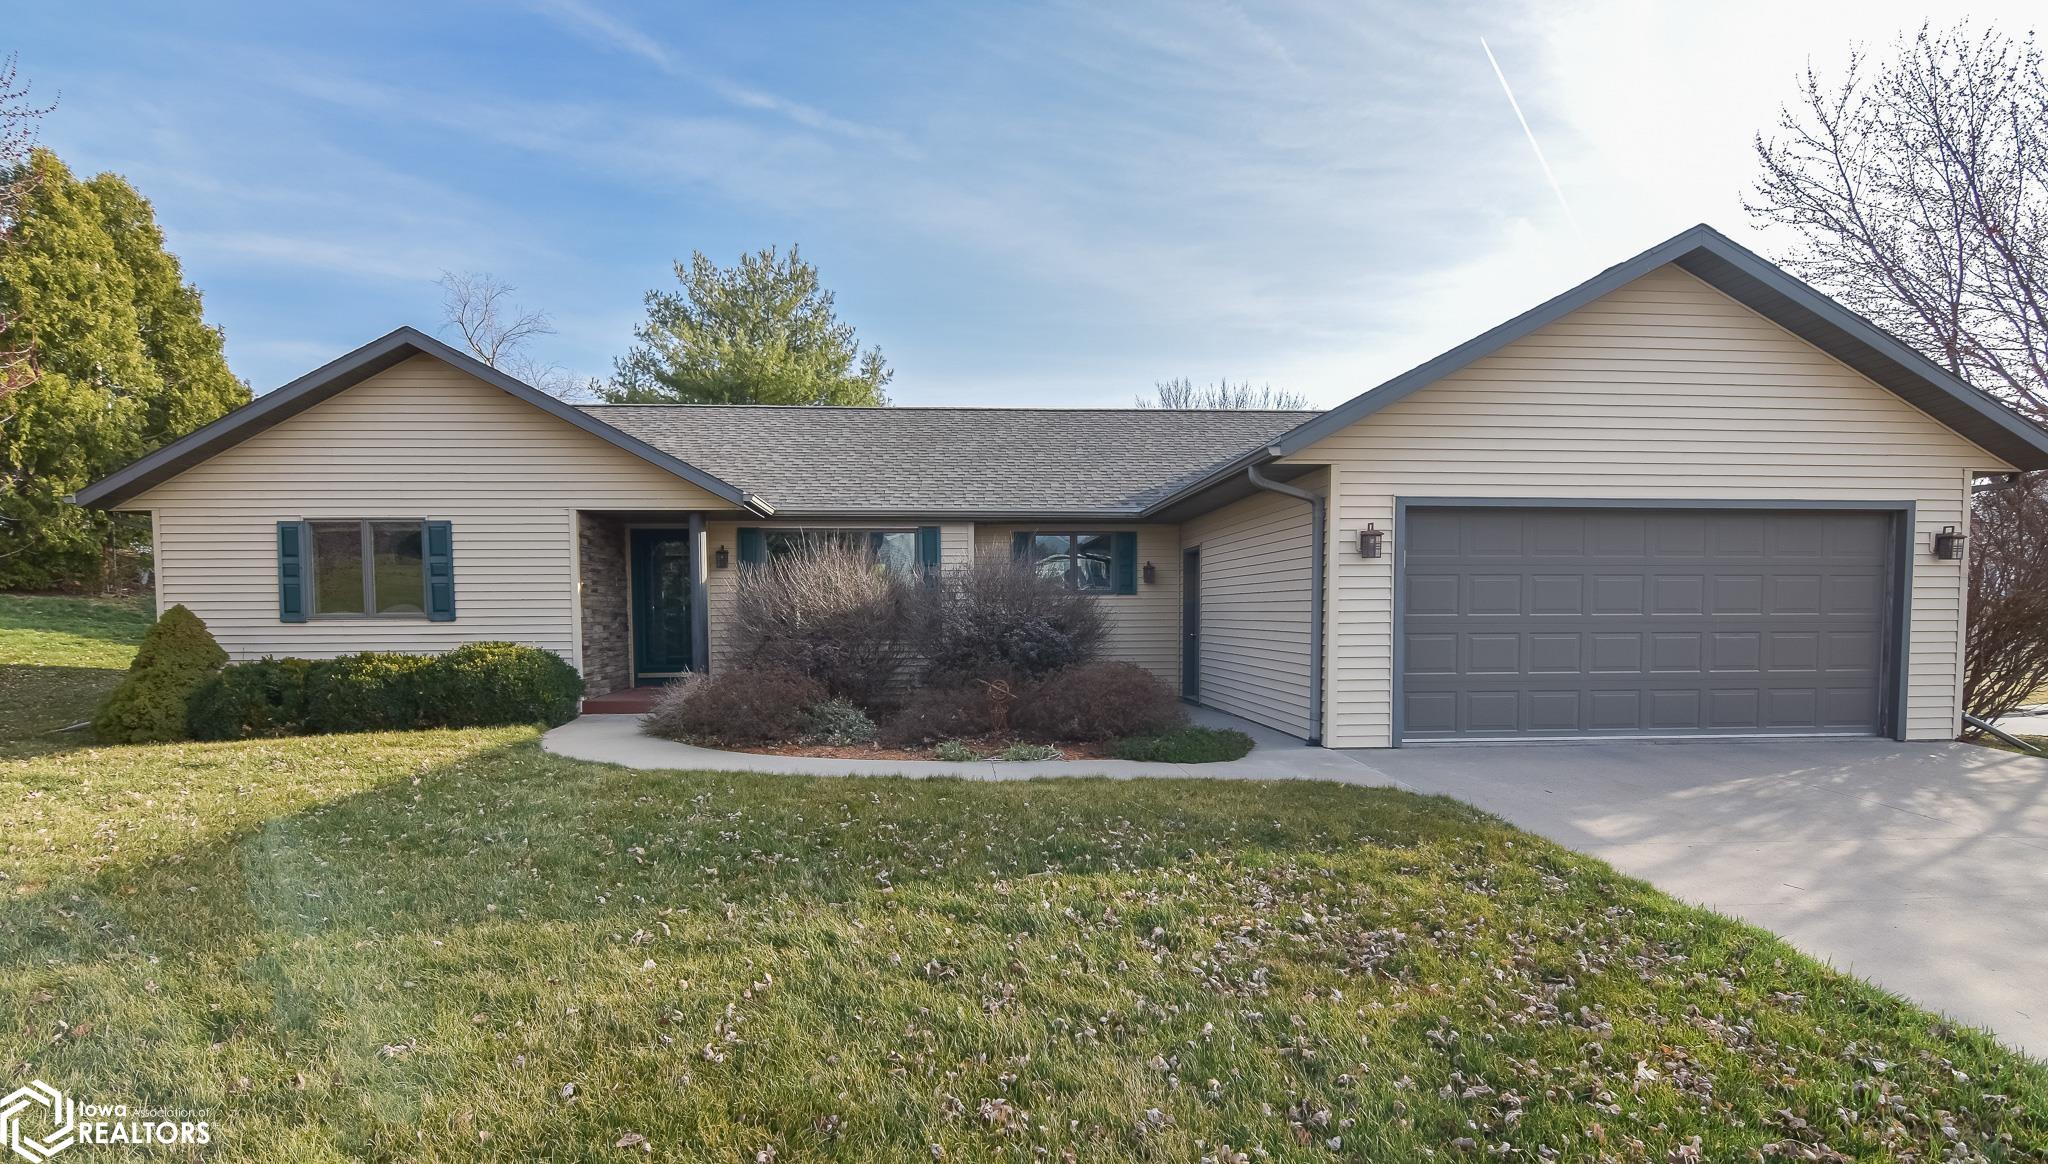 1508 Brentwood, Marshalltown, Iowa 50158, 3 Bedrooms Bedrooms, ,1 BathroomBathrooms,Single Family,For Sale,Brentwood,6315417